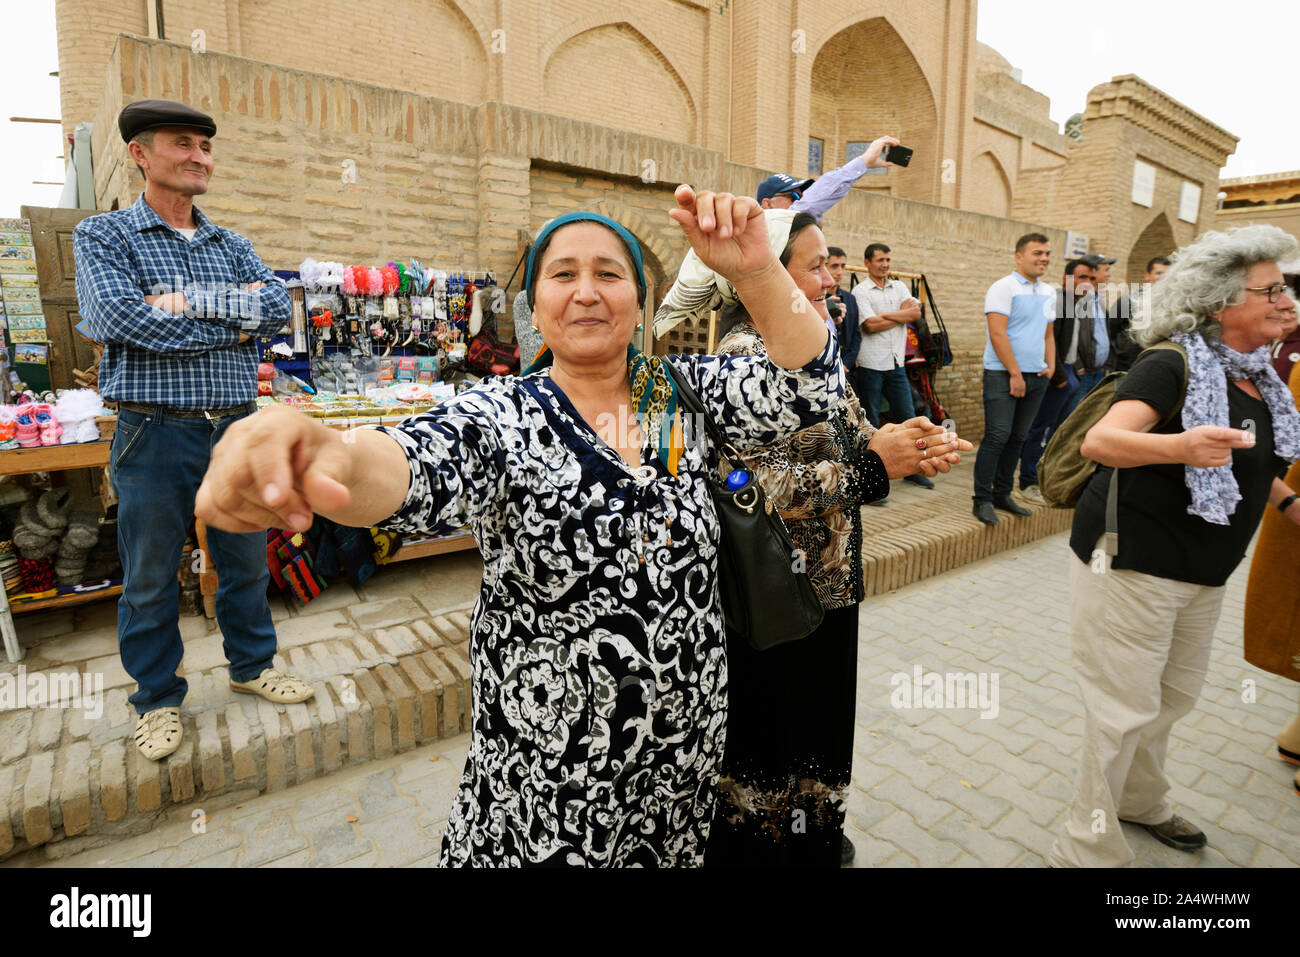 Dancing guests during a wedding in the main street of the old town of Khiva, a very popular site for all the festivities in the town. Uzbekistan Stock Photo